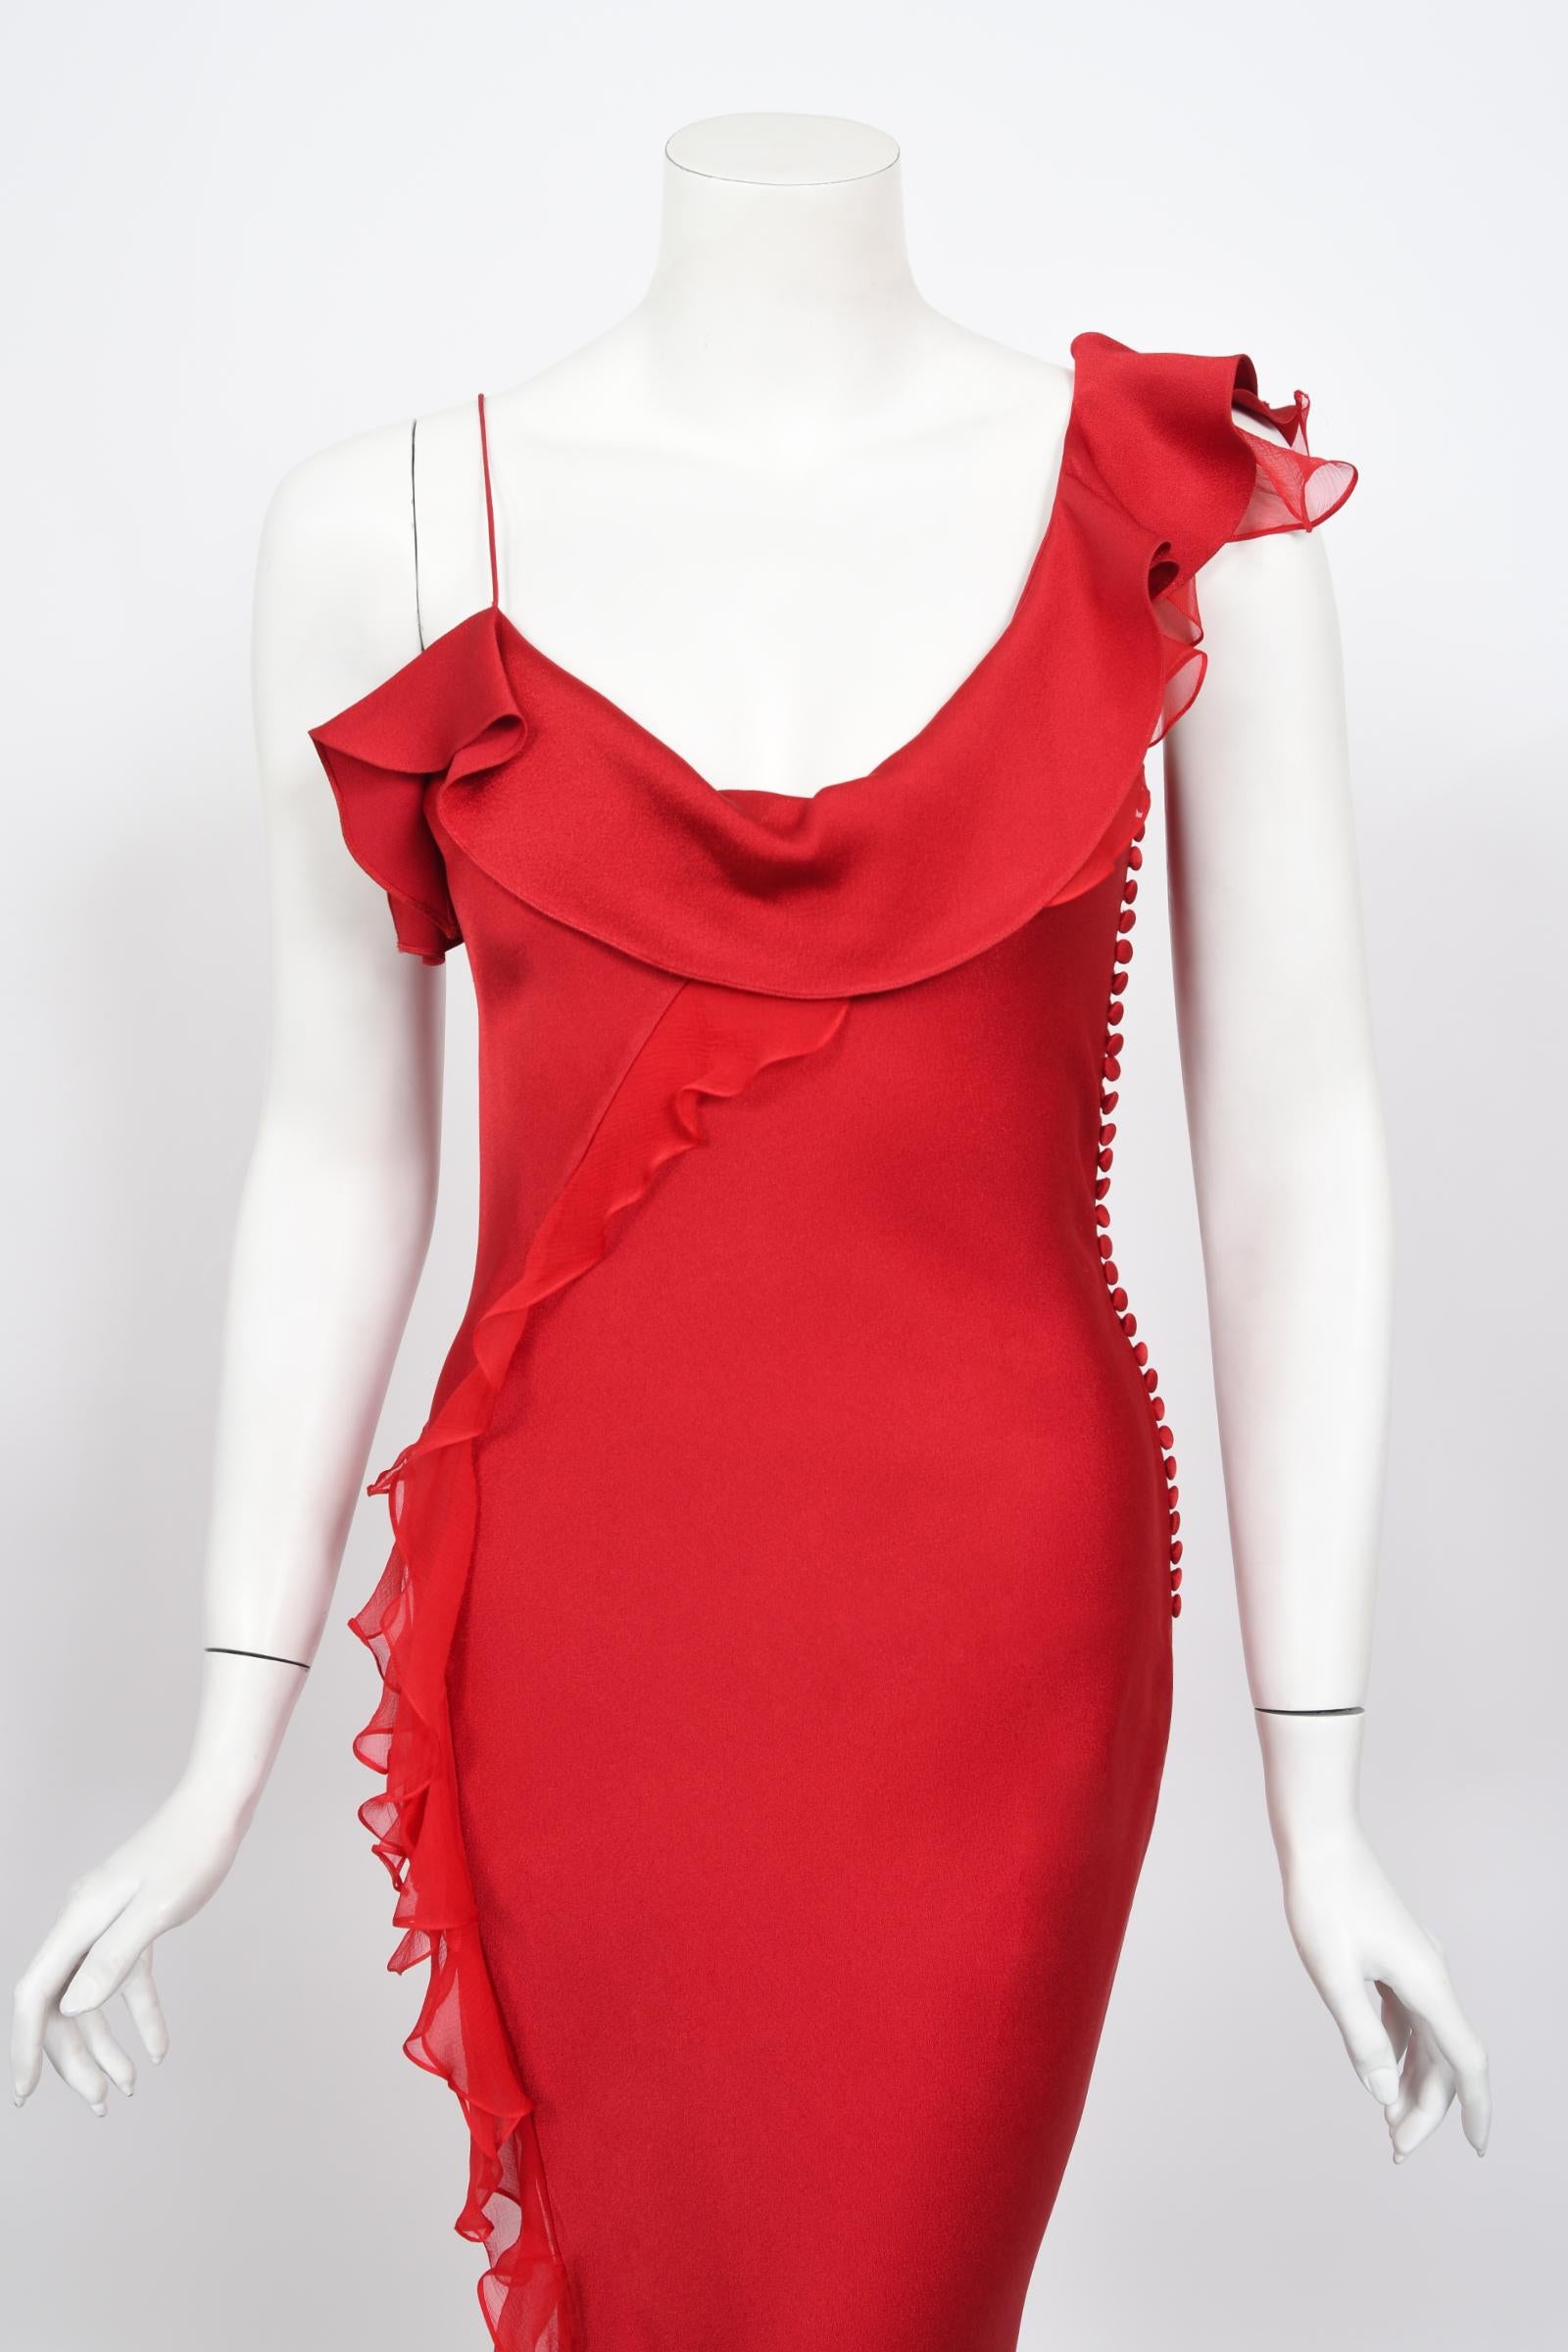 An incredibly chic and ultra flattering Christian Dior 
 ruby red bias-cut gown from John Galliano's stunning 2003 spring-summer collection. John Galliano is widely considered one of the most innovative and influential fashion designers of the early